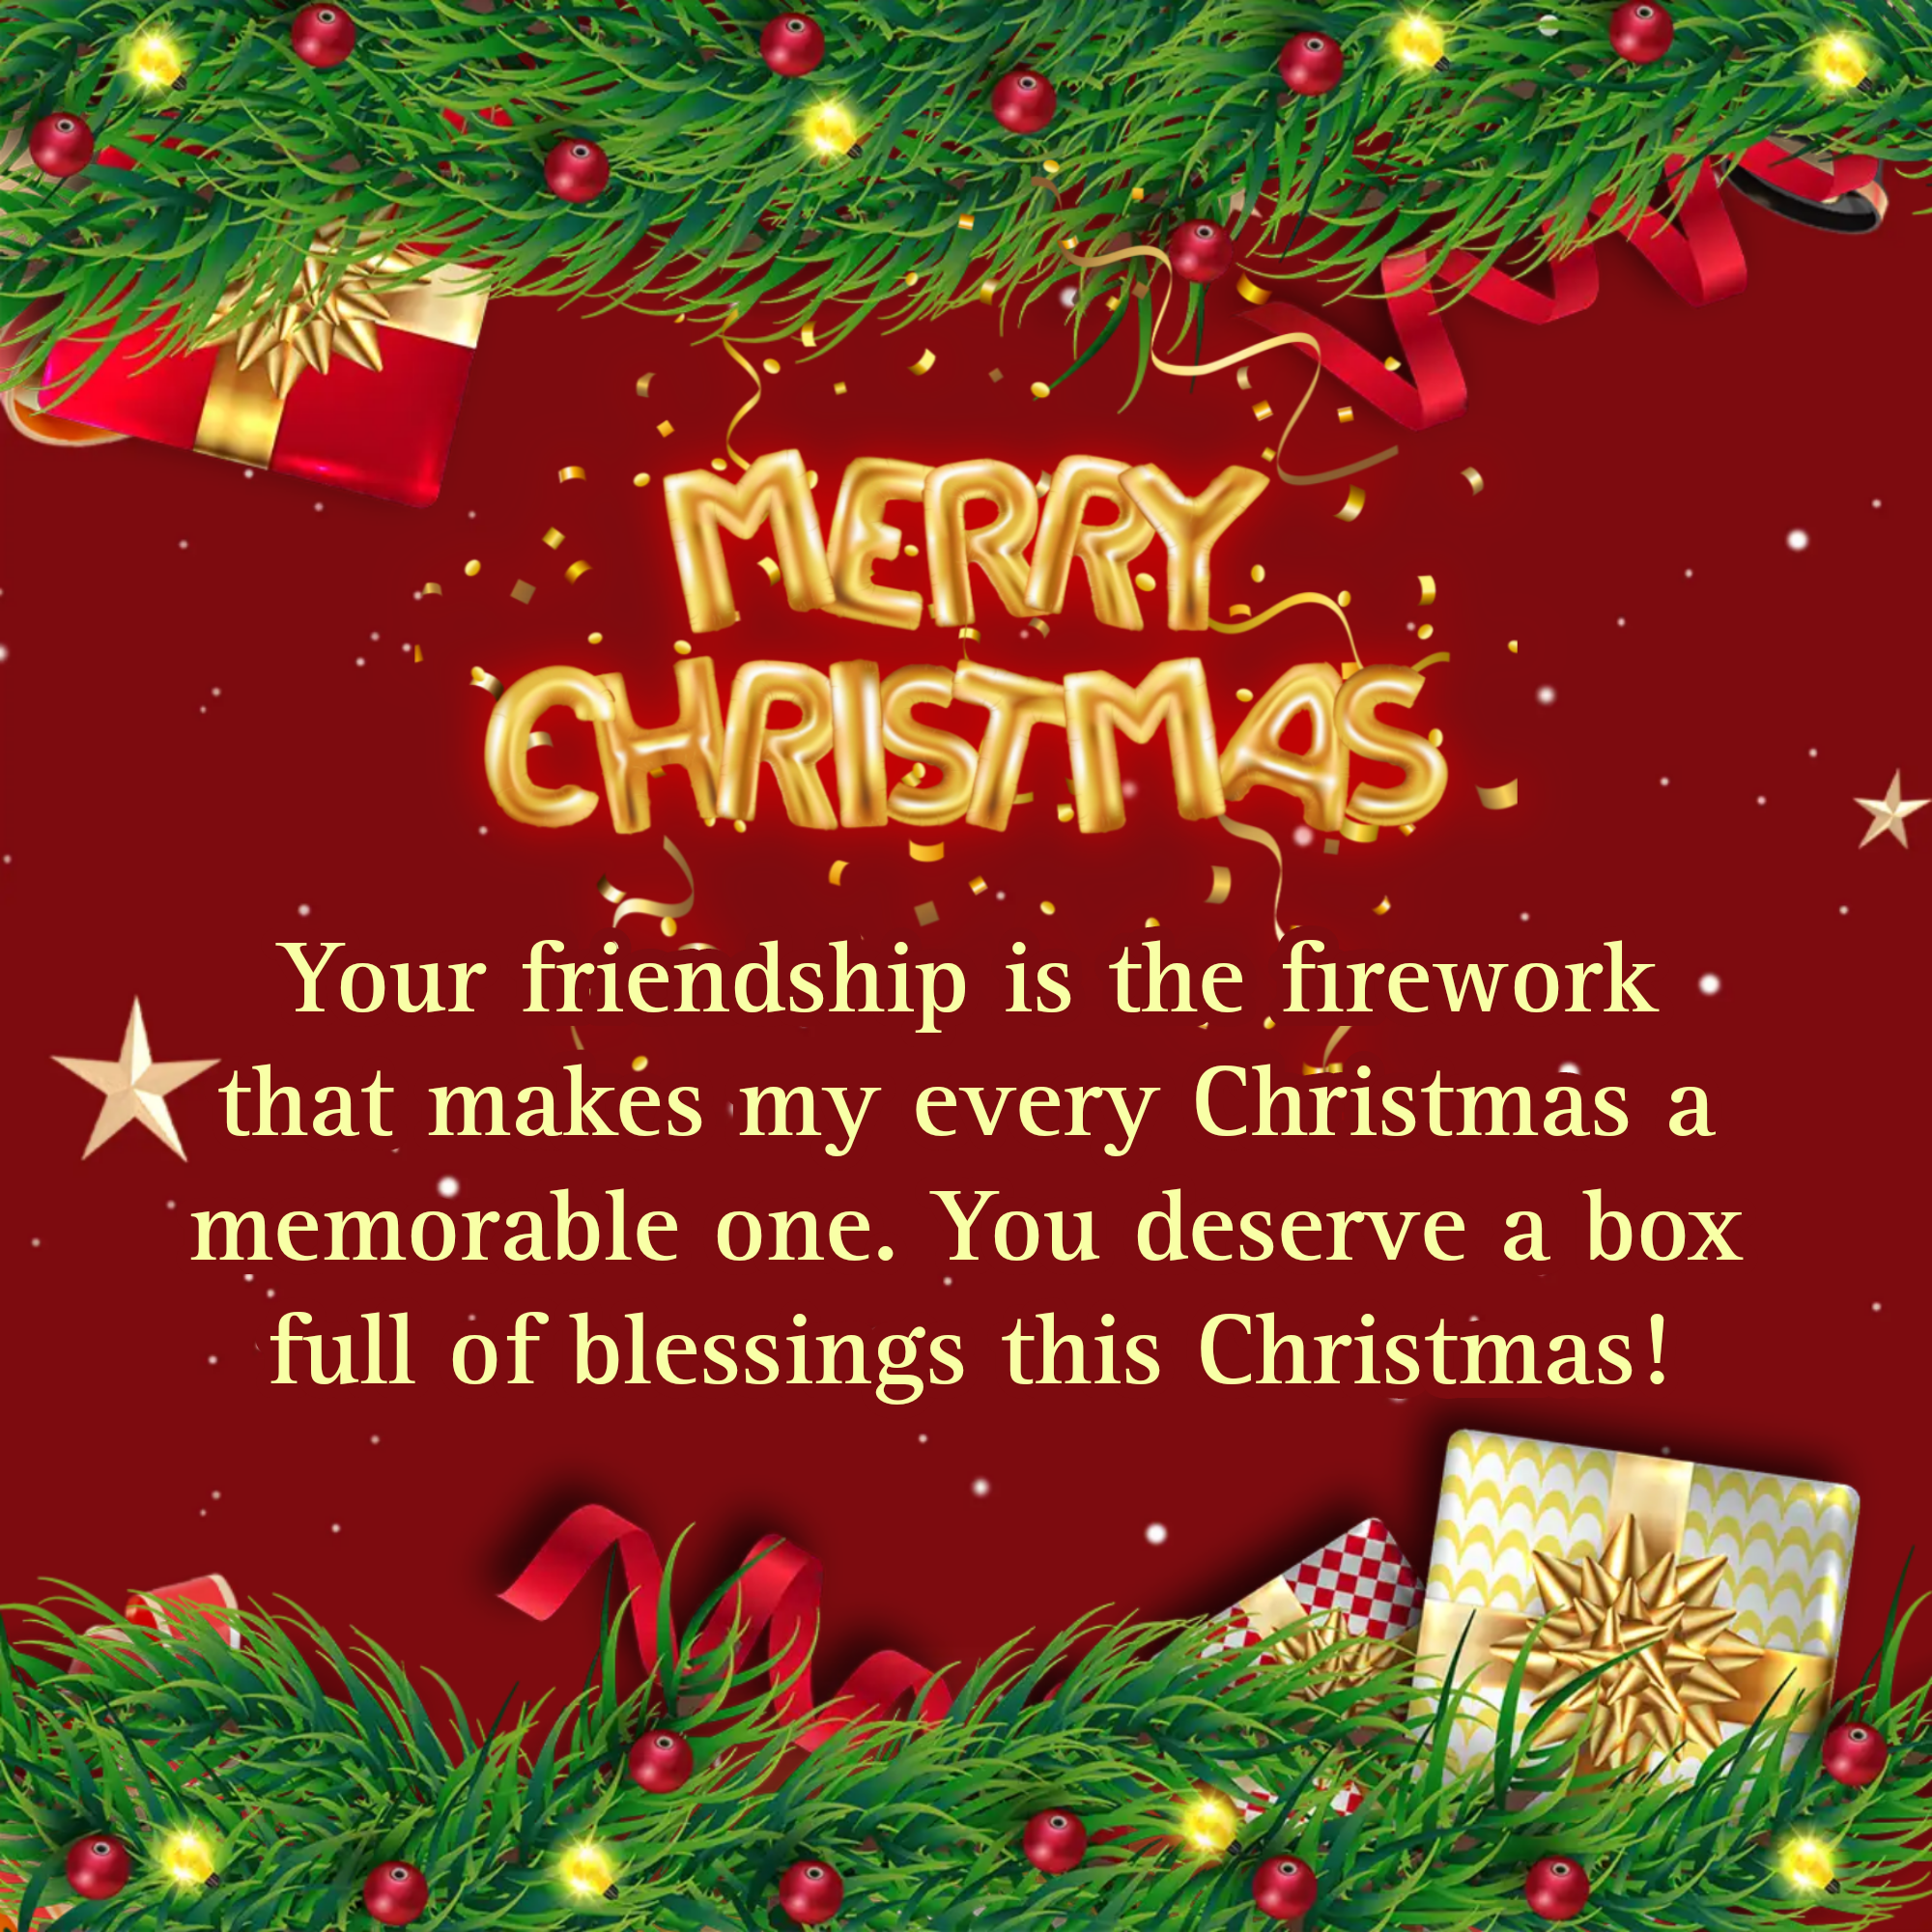 Your friendship is the firework that makes my every Christmas